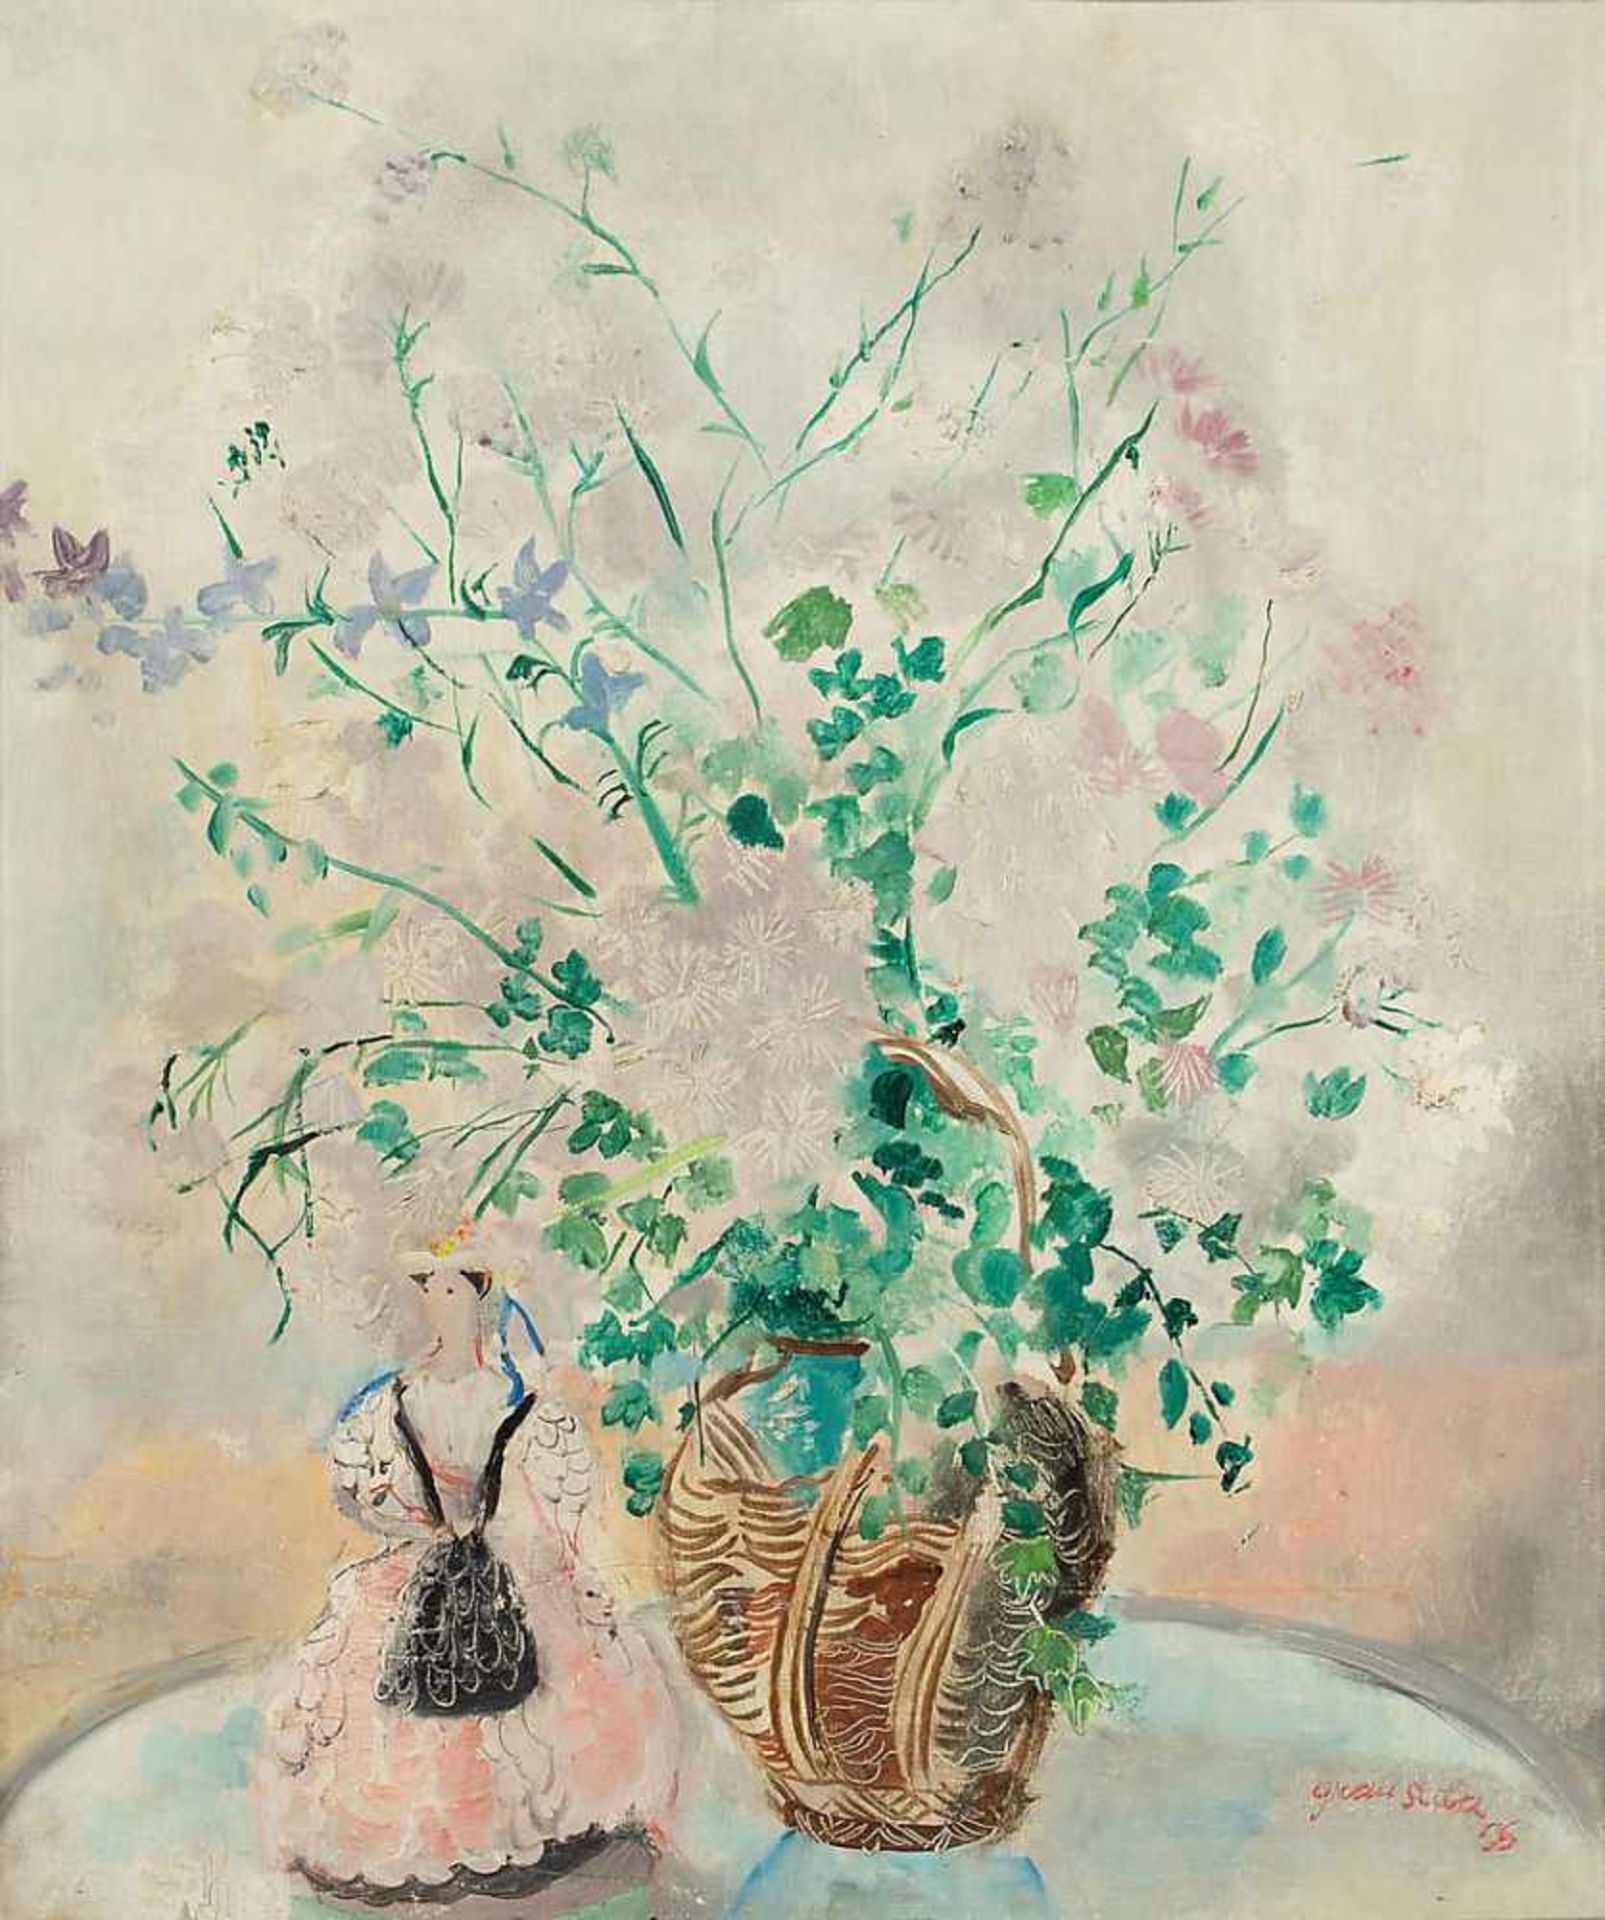 EMILI GRAU SALA. Still life. (d)Oil on canvas Signed and dated 1956. On the back, an inventory